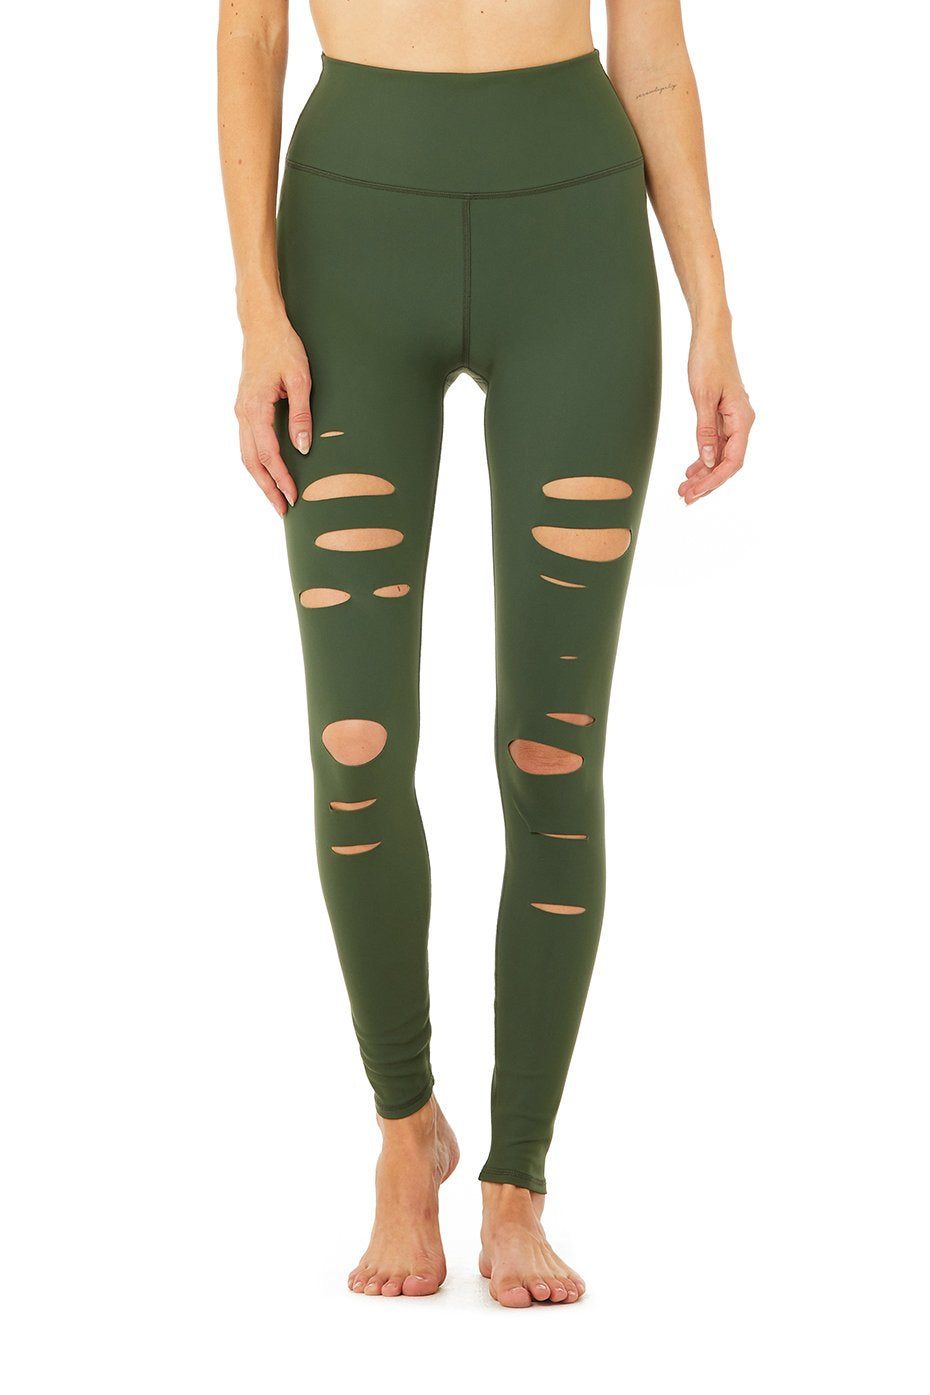 Alo Yoga Warrior Extreme Ripped Leggings for Sale in Portland, OR - OfferUp